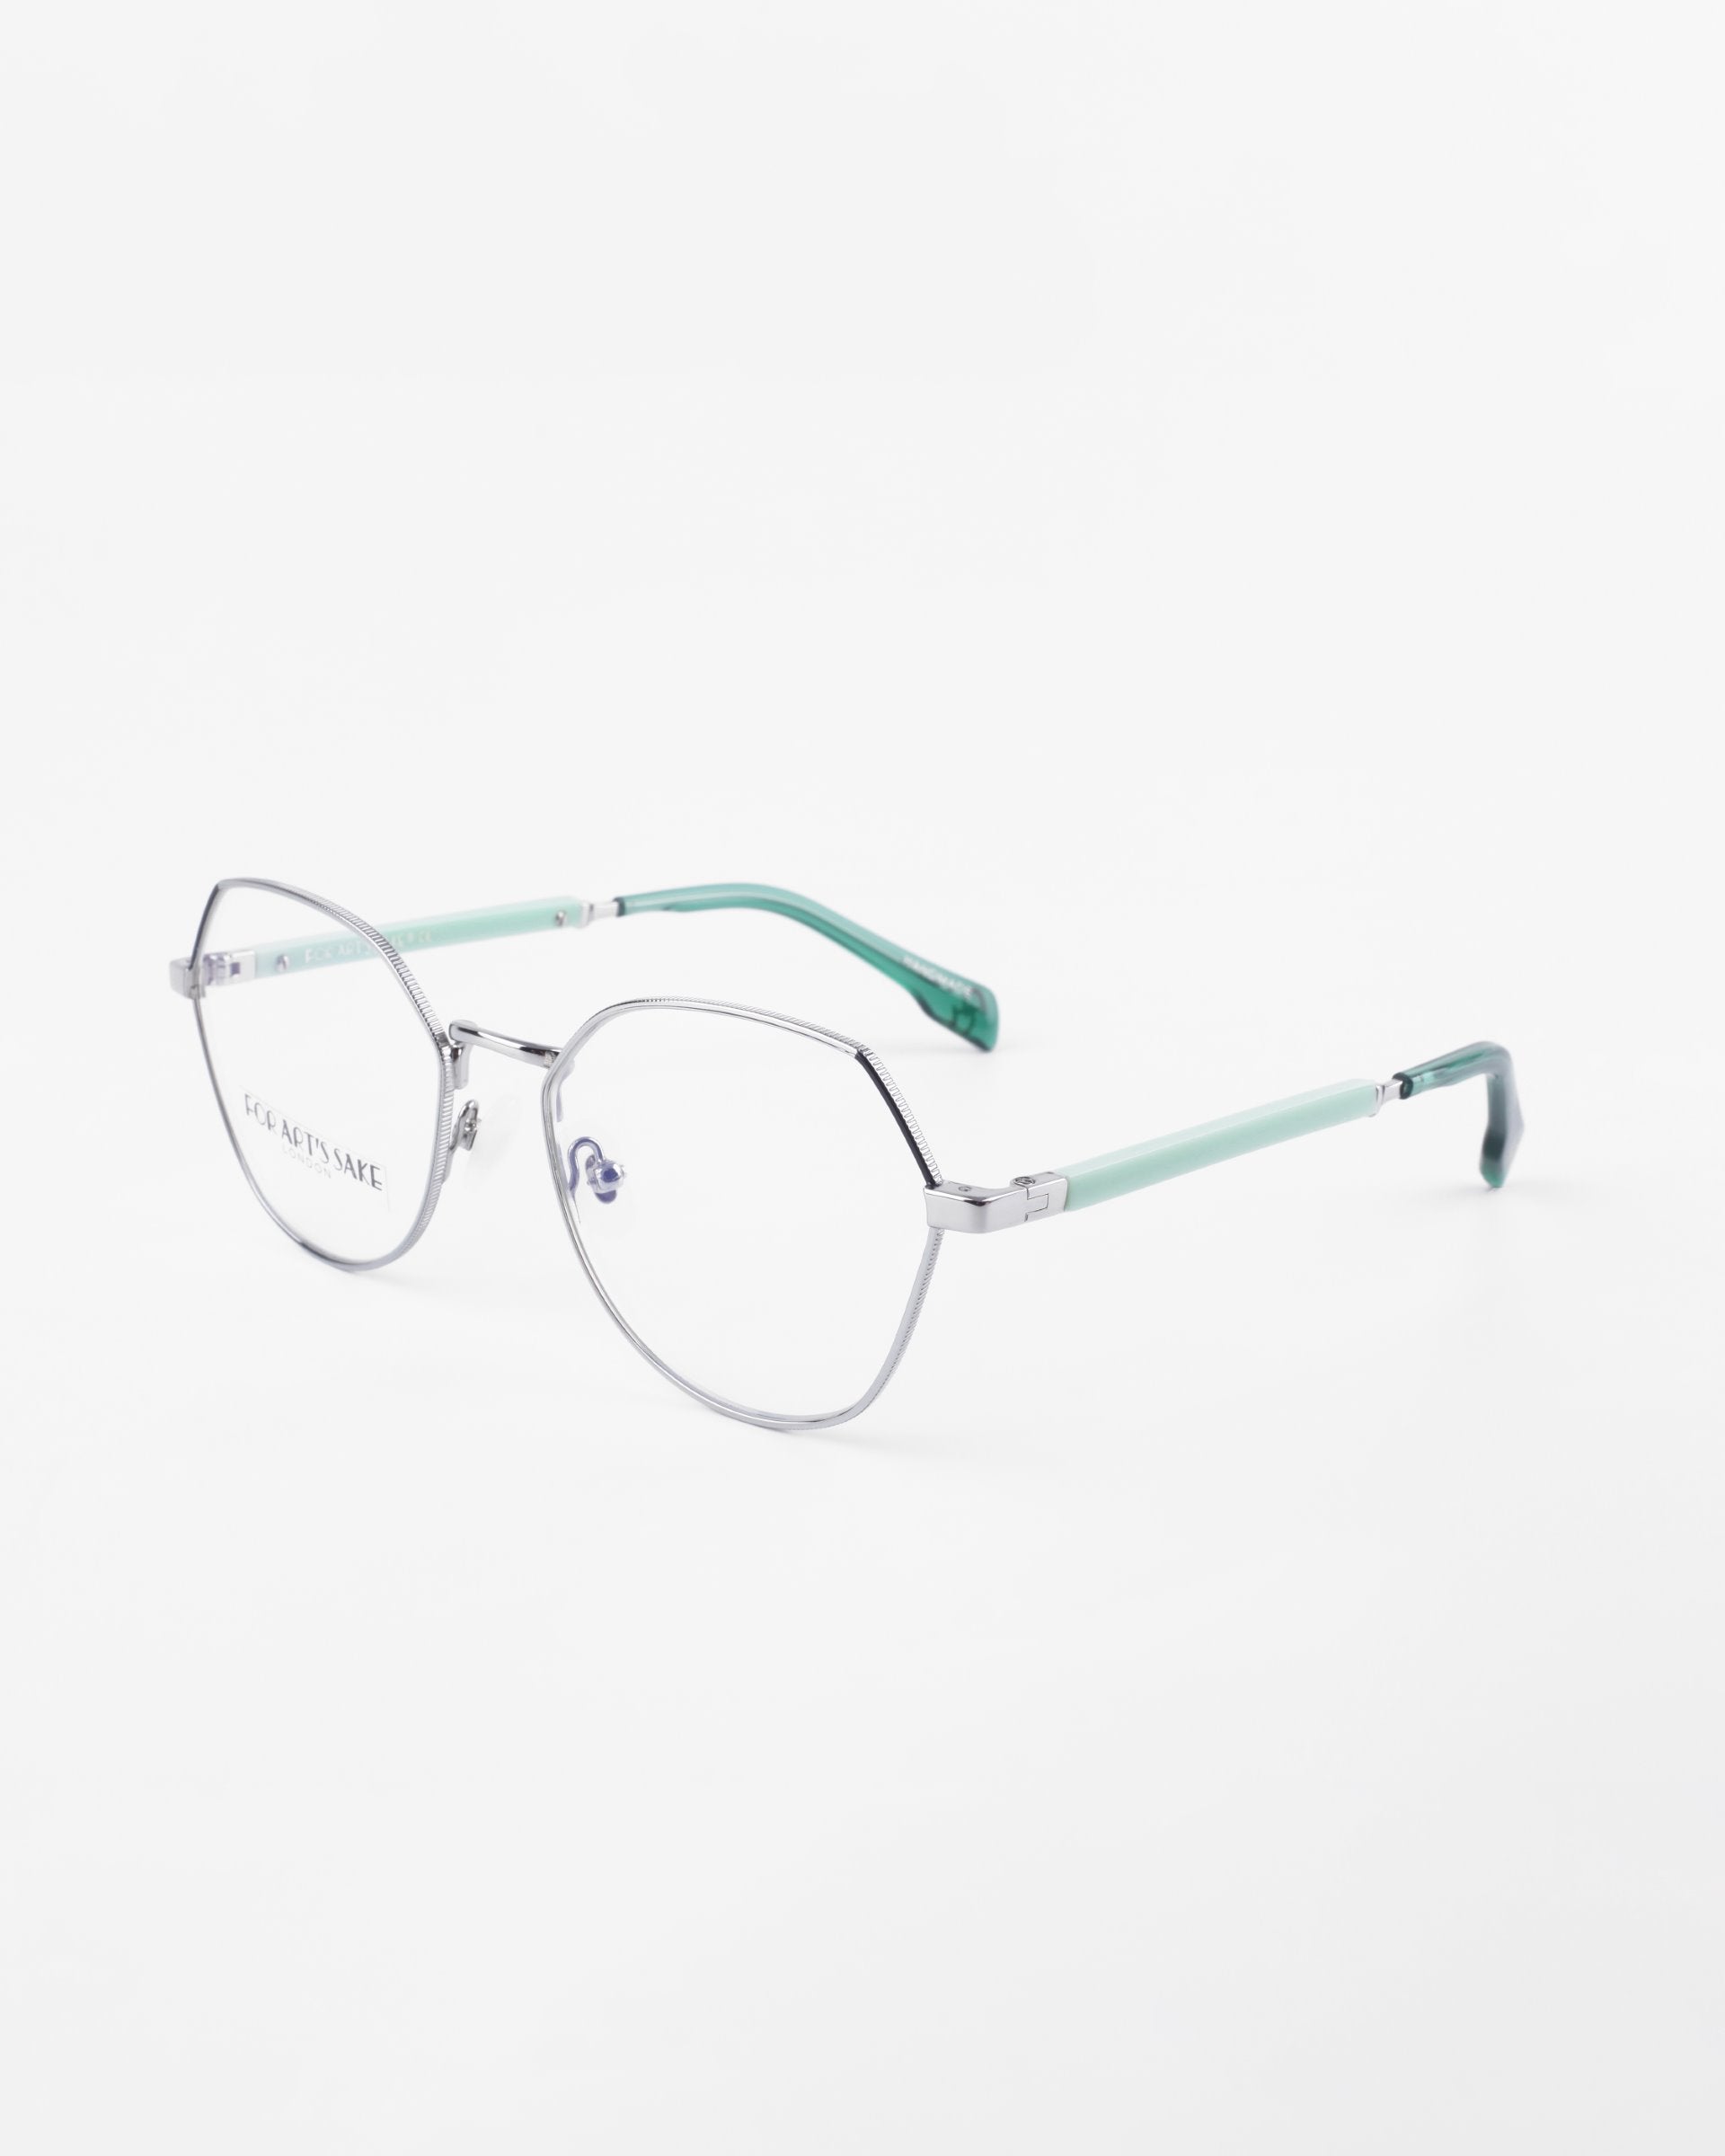 A pair of Orchard by For Art&#39;s Sake® eyeglasses with hexagonal silver frames and clear, prescription lenses. The arms of the glasses are light green, creating a modern and stylish look. The background is plain white, highlighting the glasses.